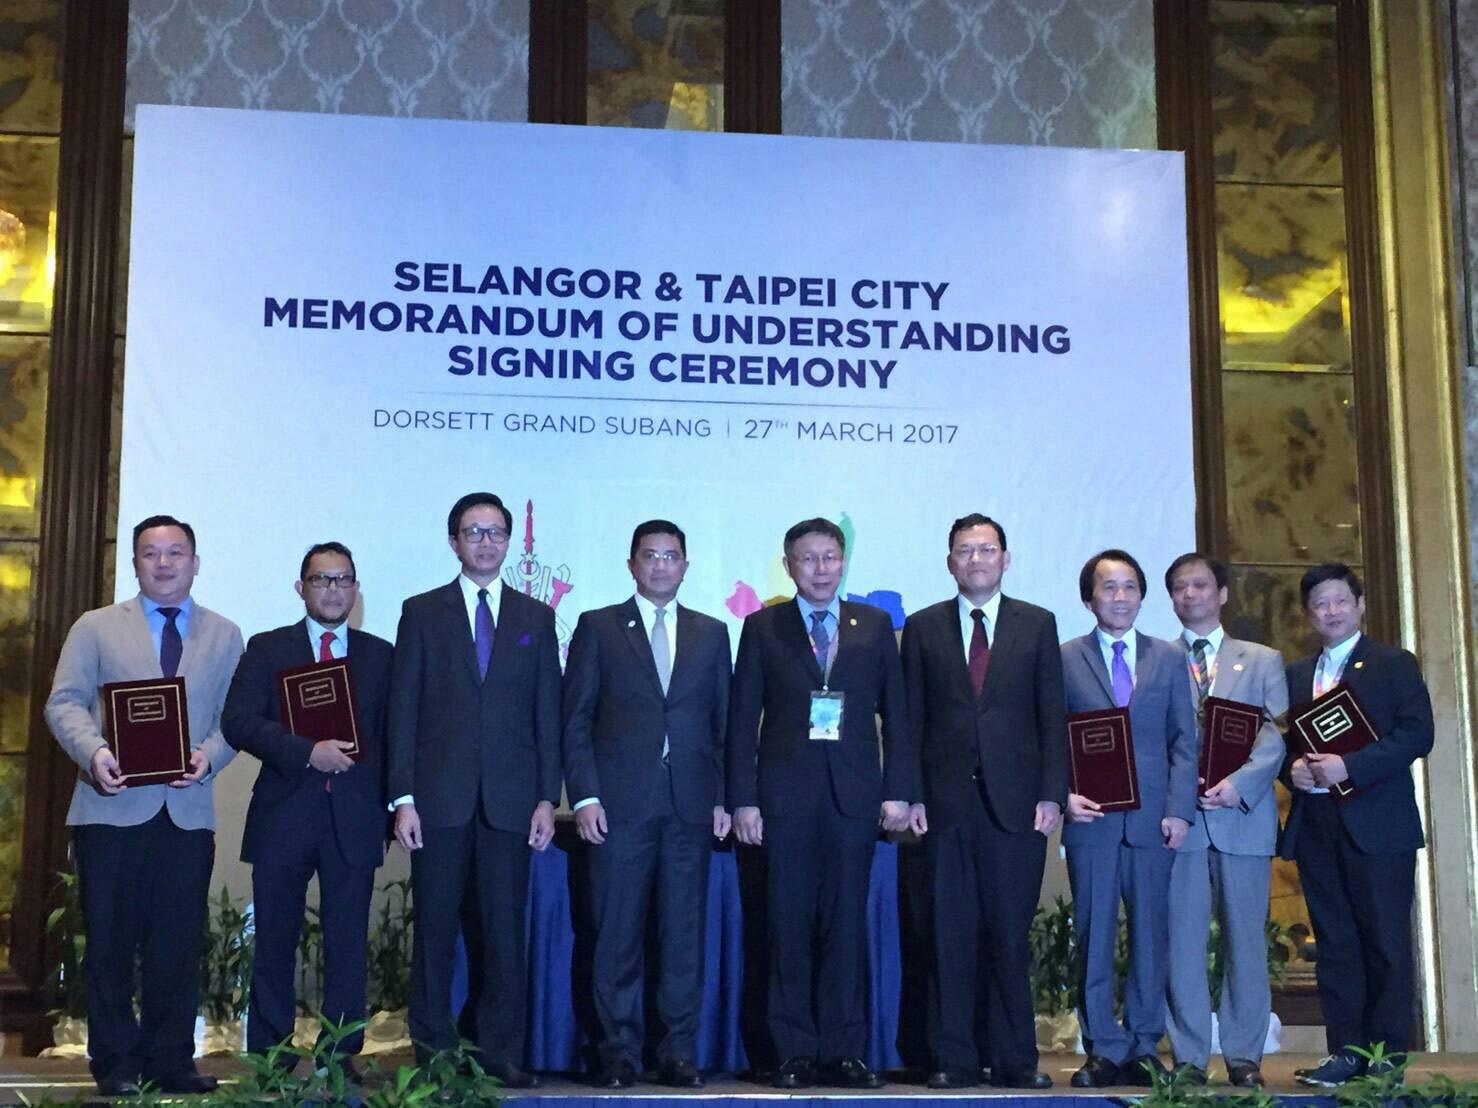  Representative Chang, James Chi-ping (4th from right) attends the Selangor &amp; Taipei City MOU Signing Ceremony at Hotel Dorsett Grand Subang on March 27, 2017.
